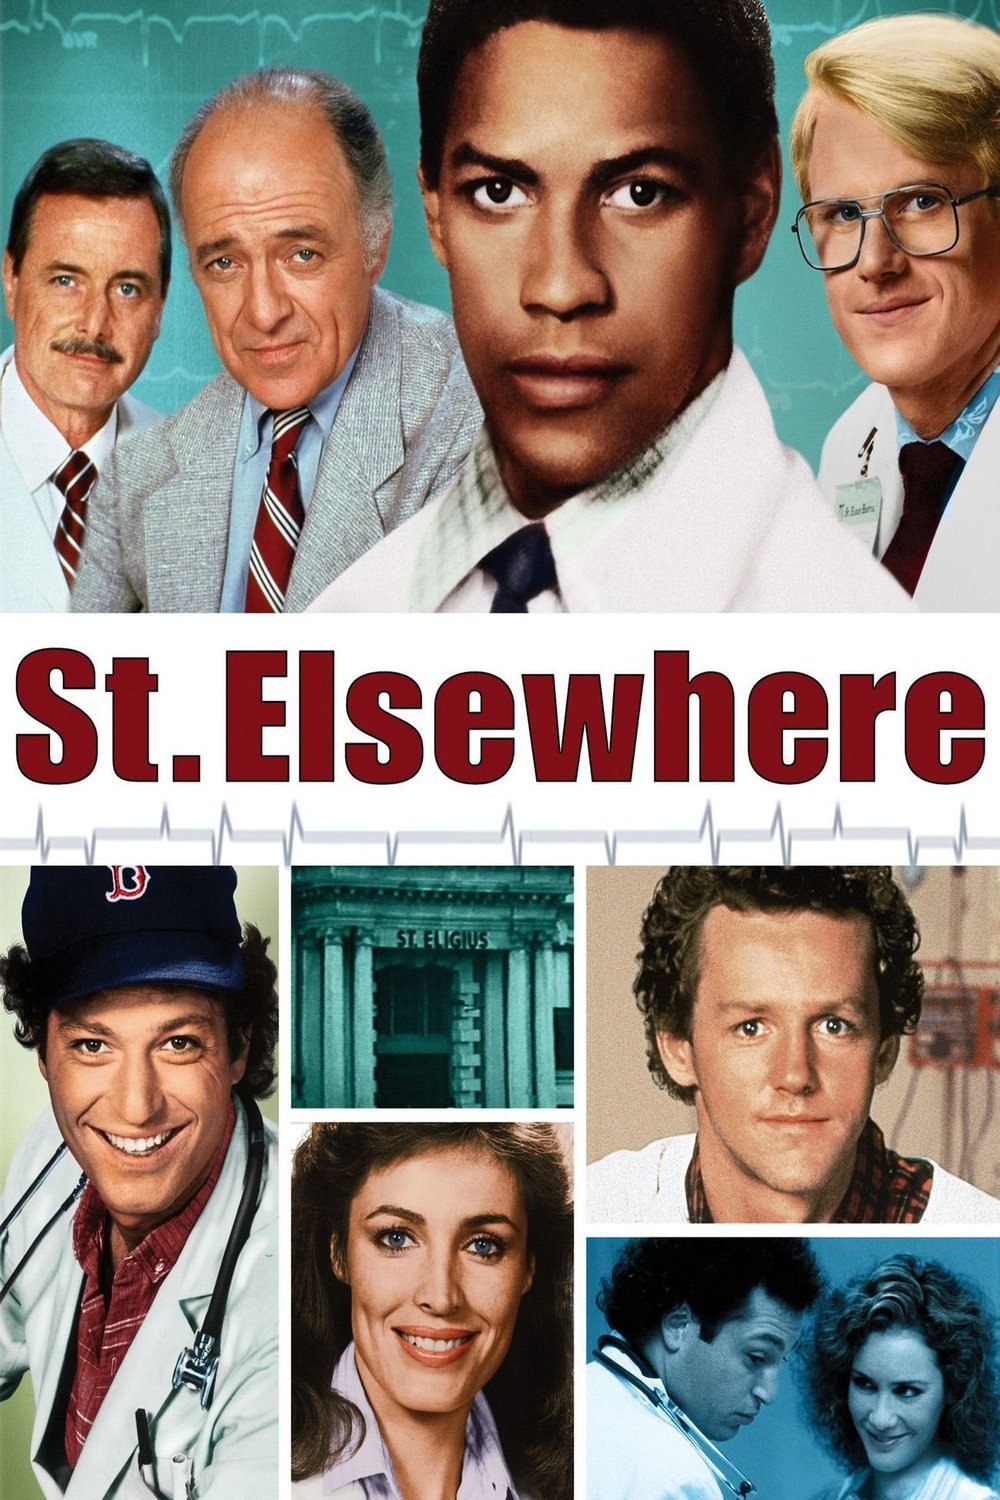 Poster of the movie St. Elsewhere